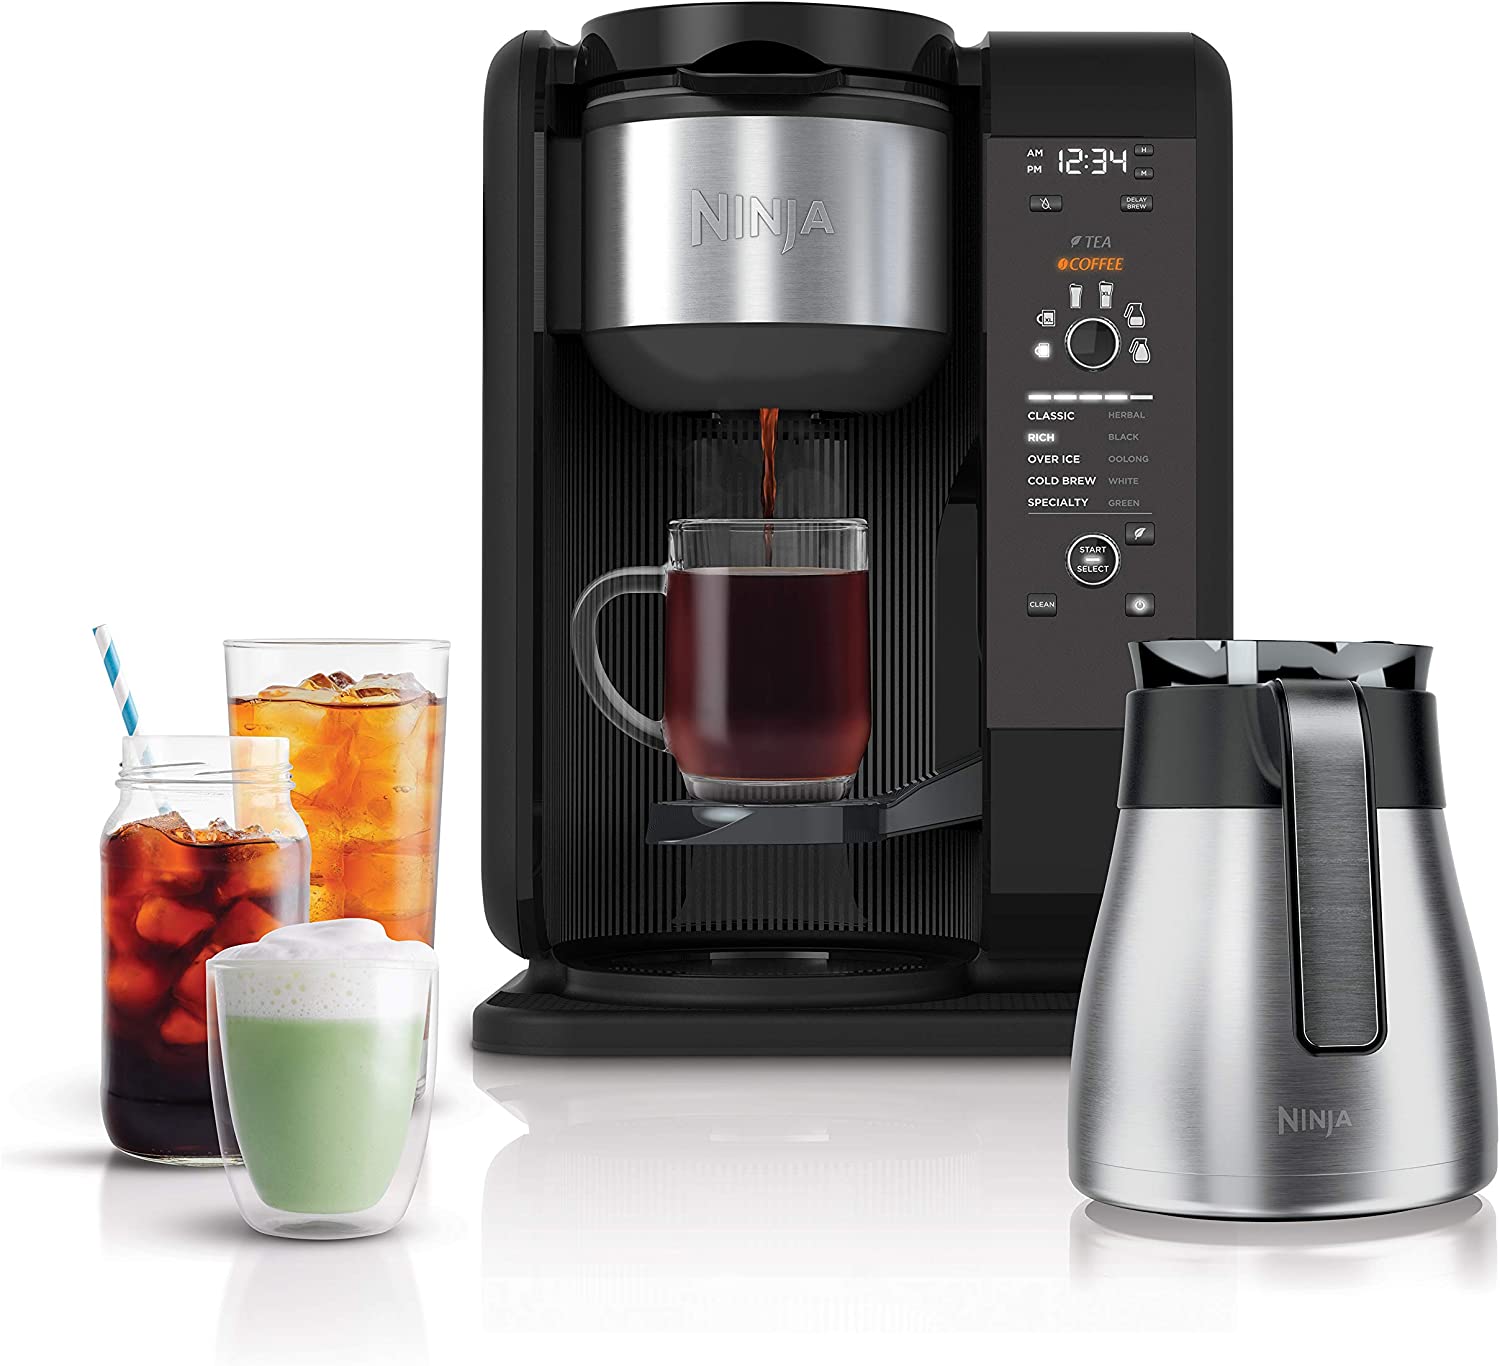 Ninja Hot And Cold Brew System- Amazon Prime Day Deal!